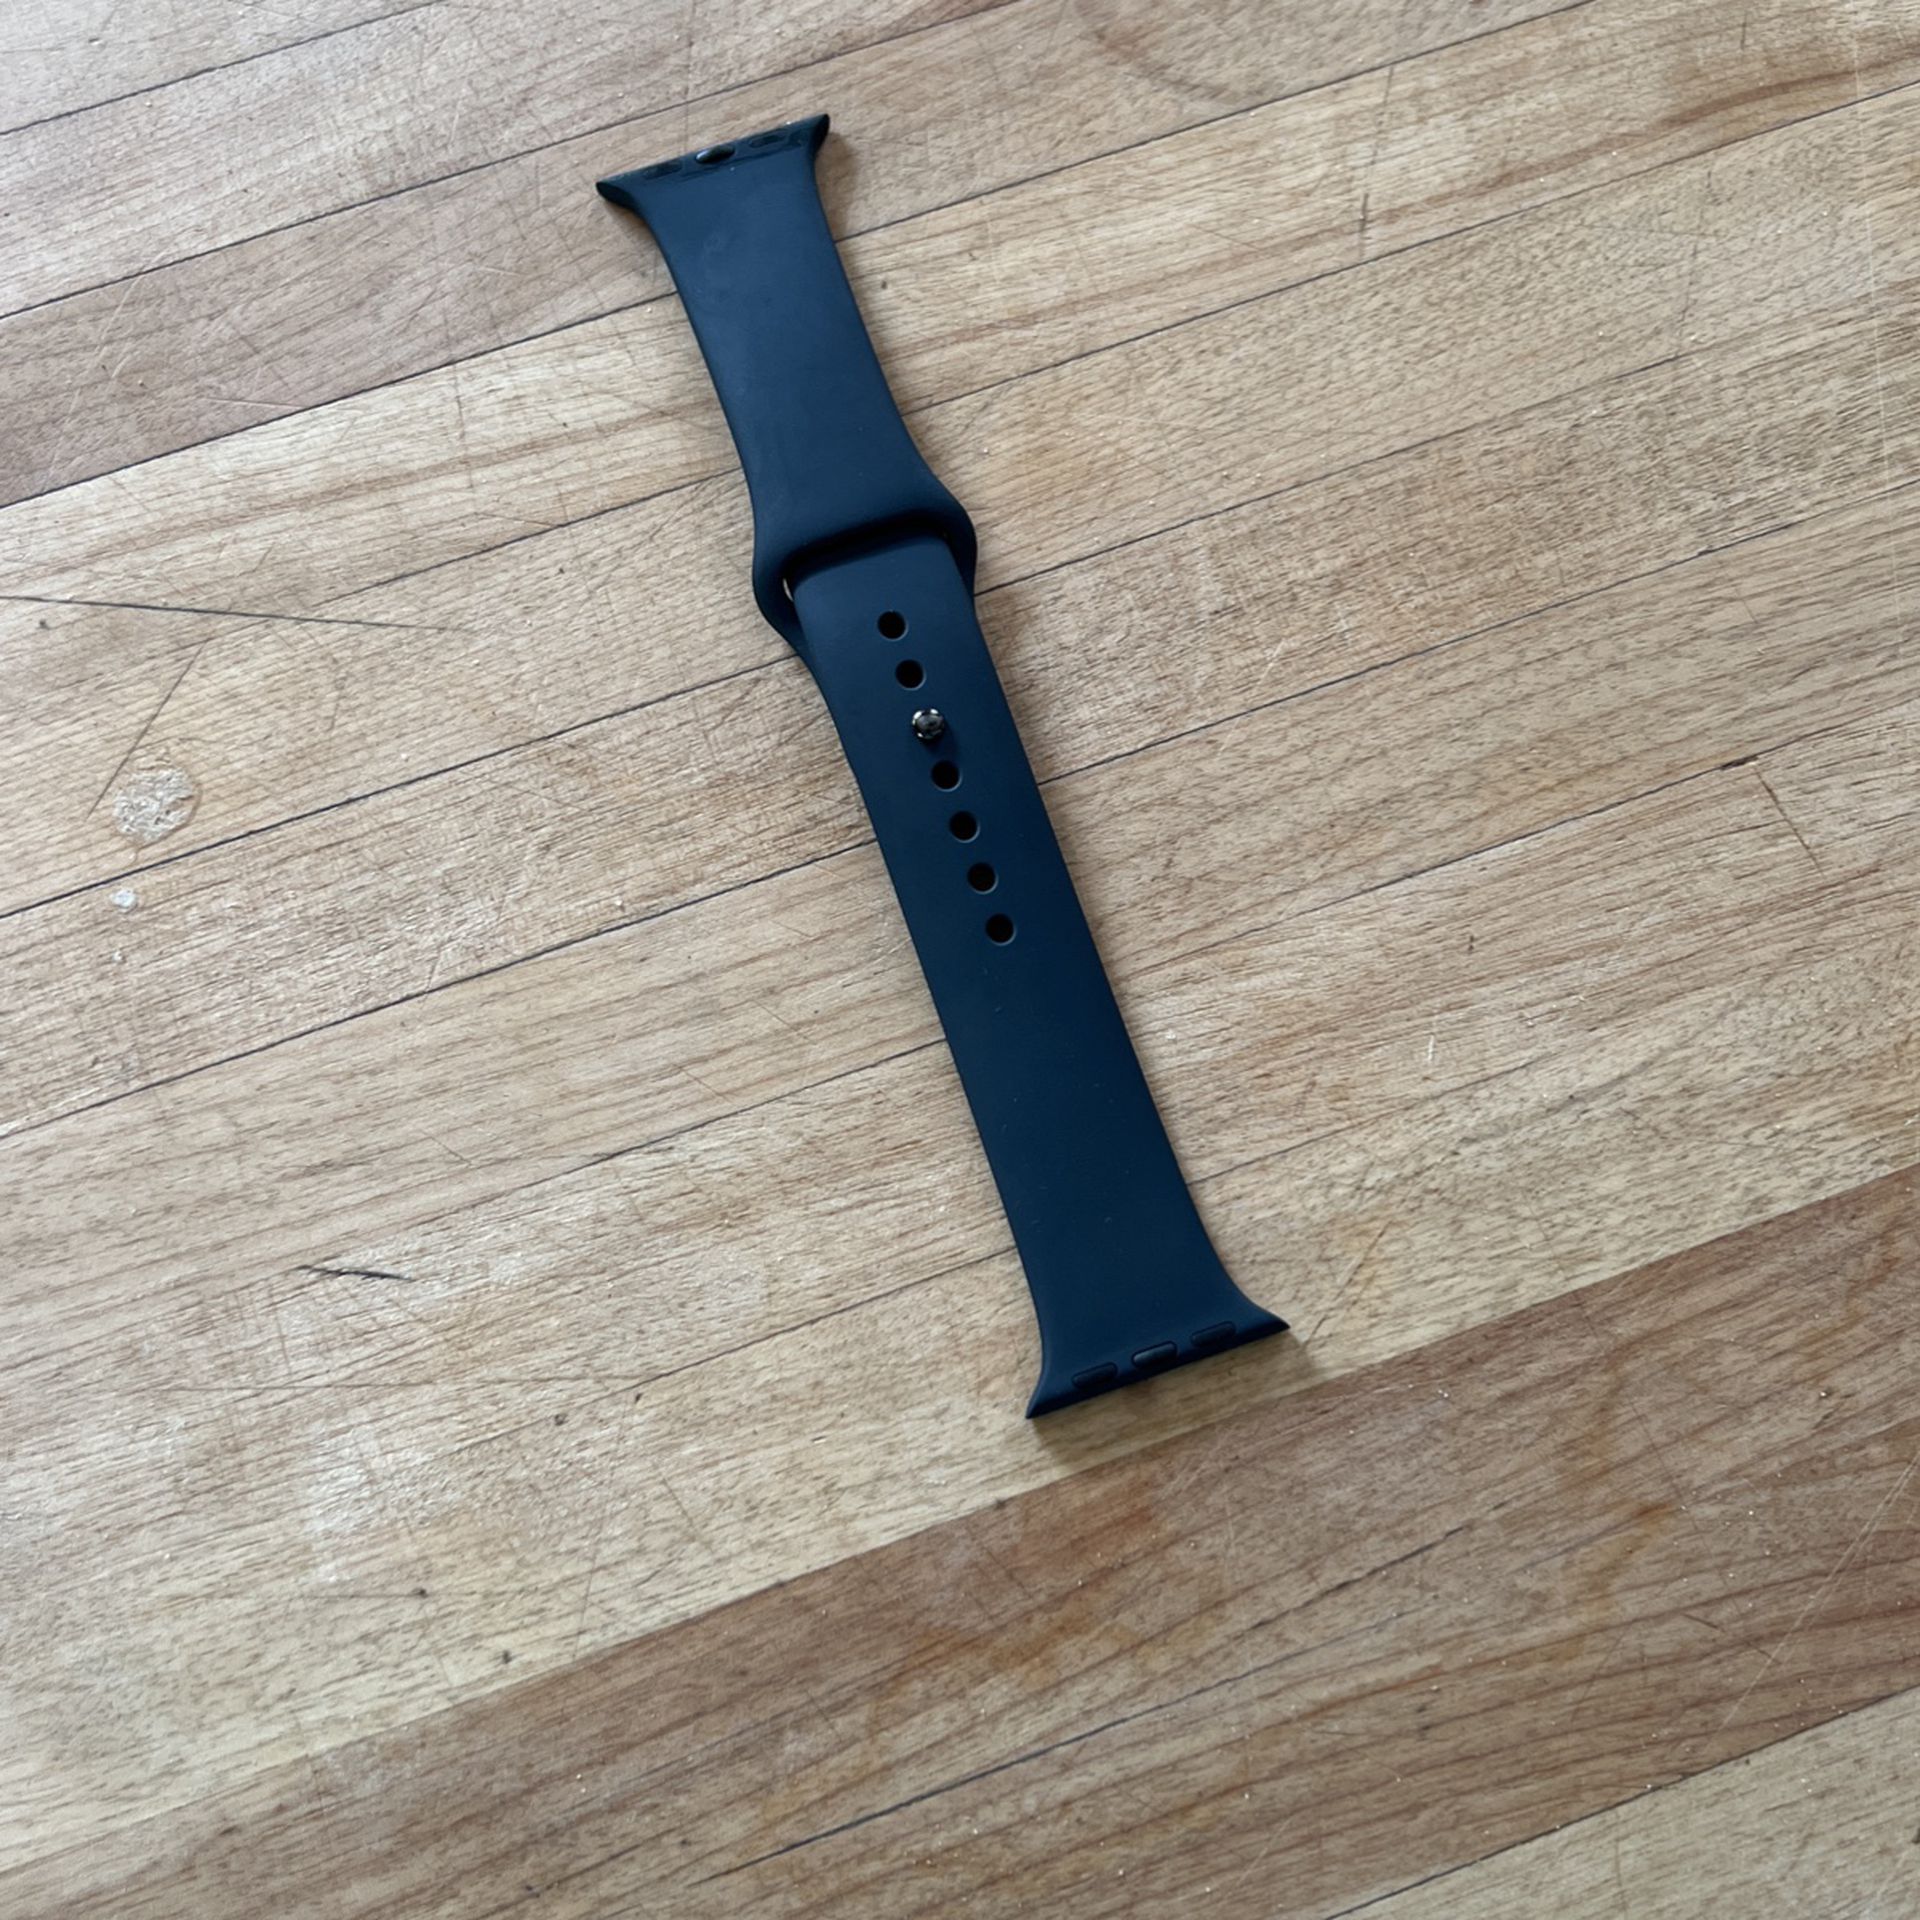 Apple Watch Sport Band, never used